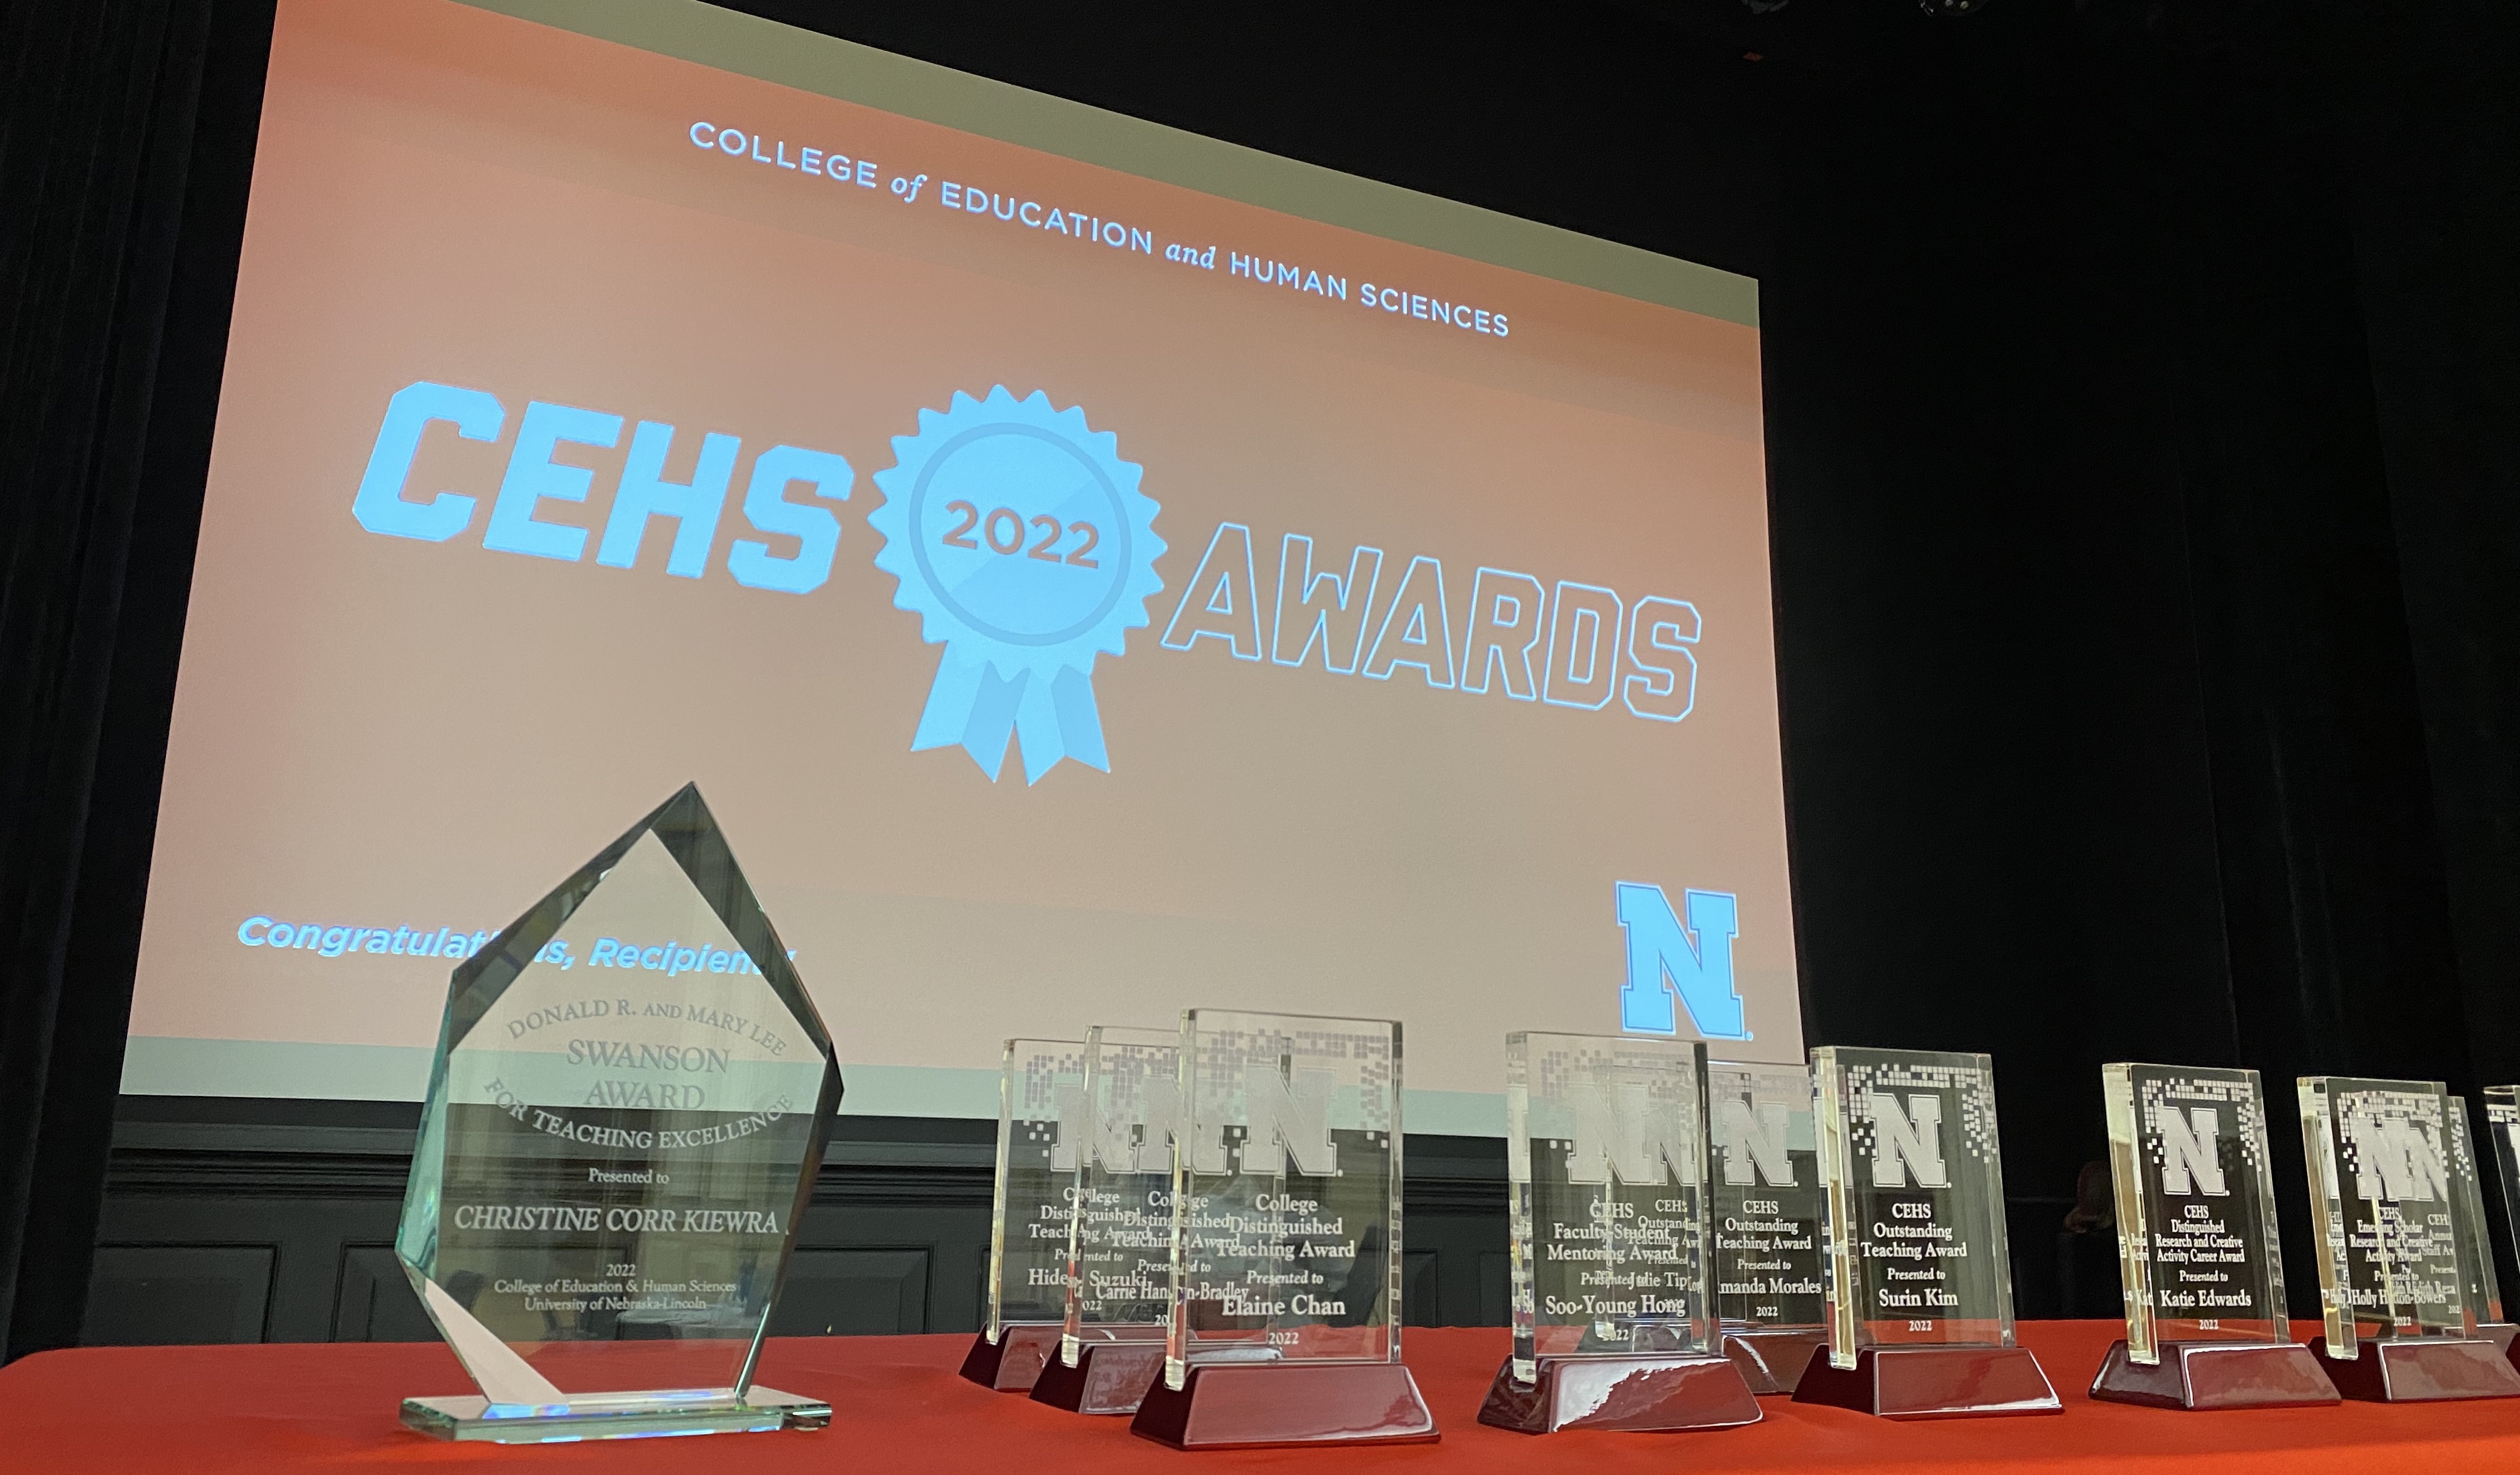 Several glass awards in front of a large red screen. 